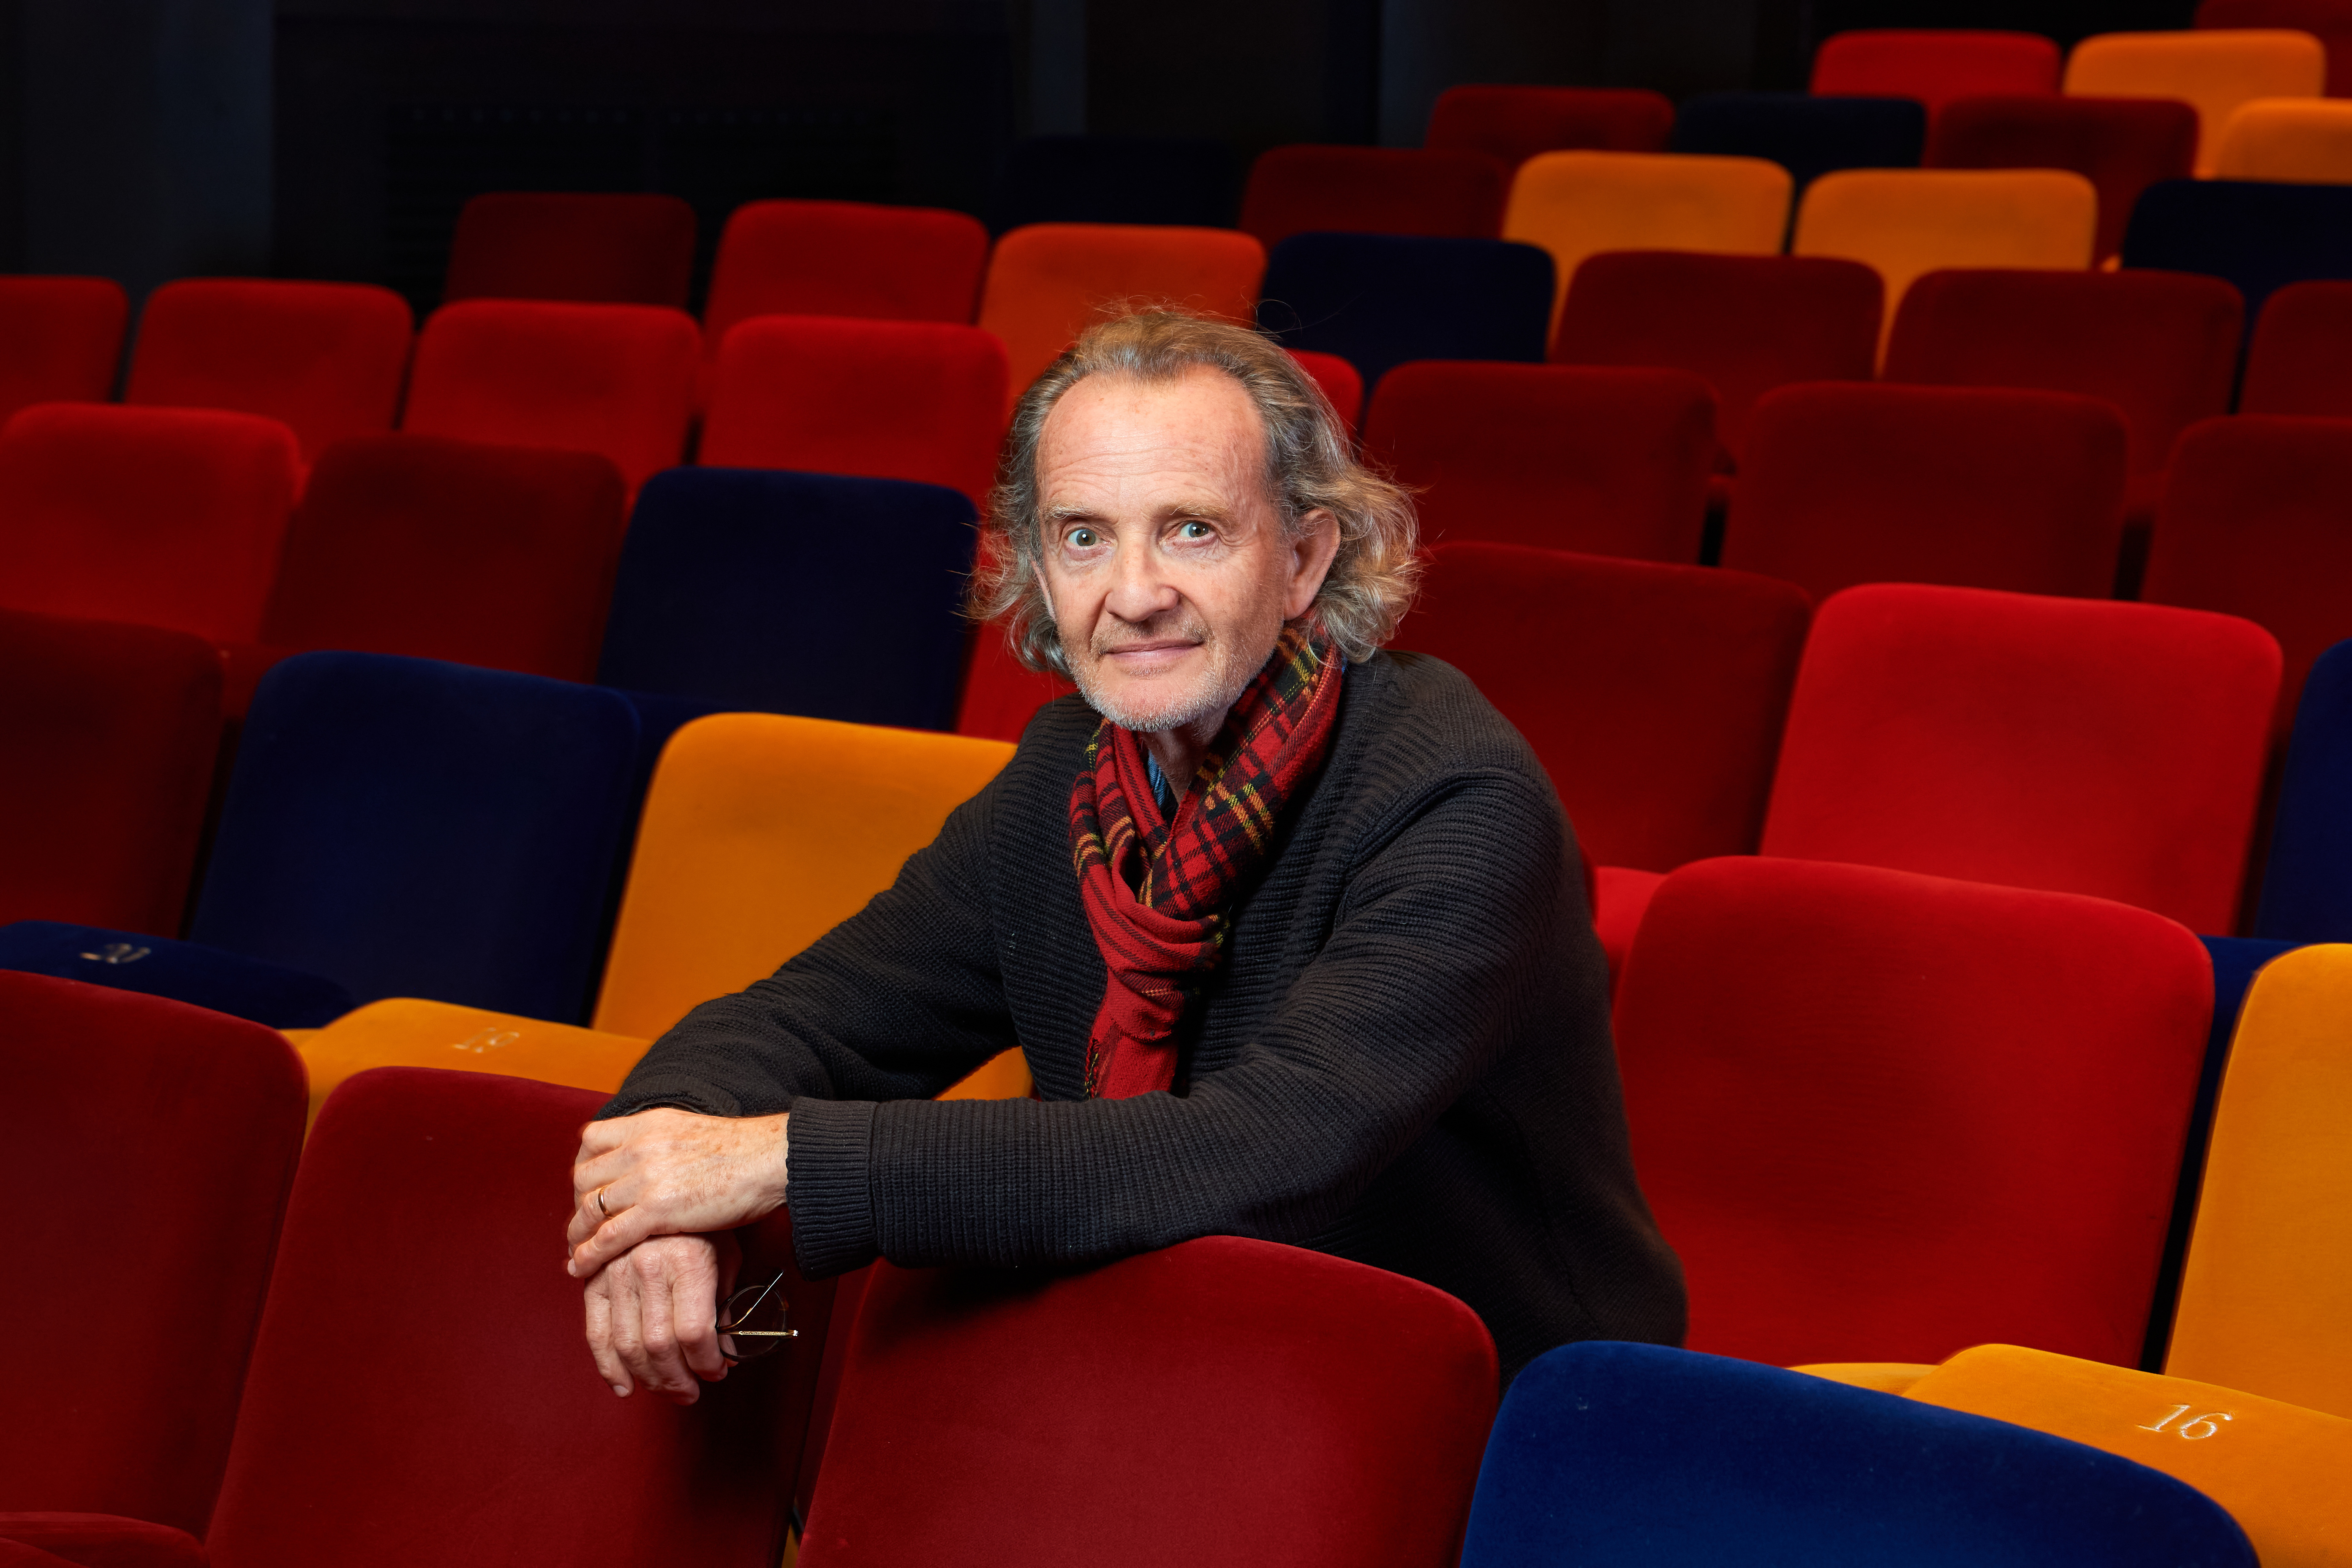 Anton Lesser sat in the Oxford Playhouse auditorium with his hands over the seat in front of him.